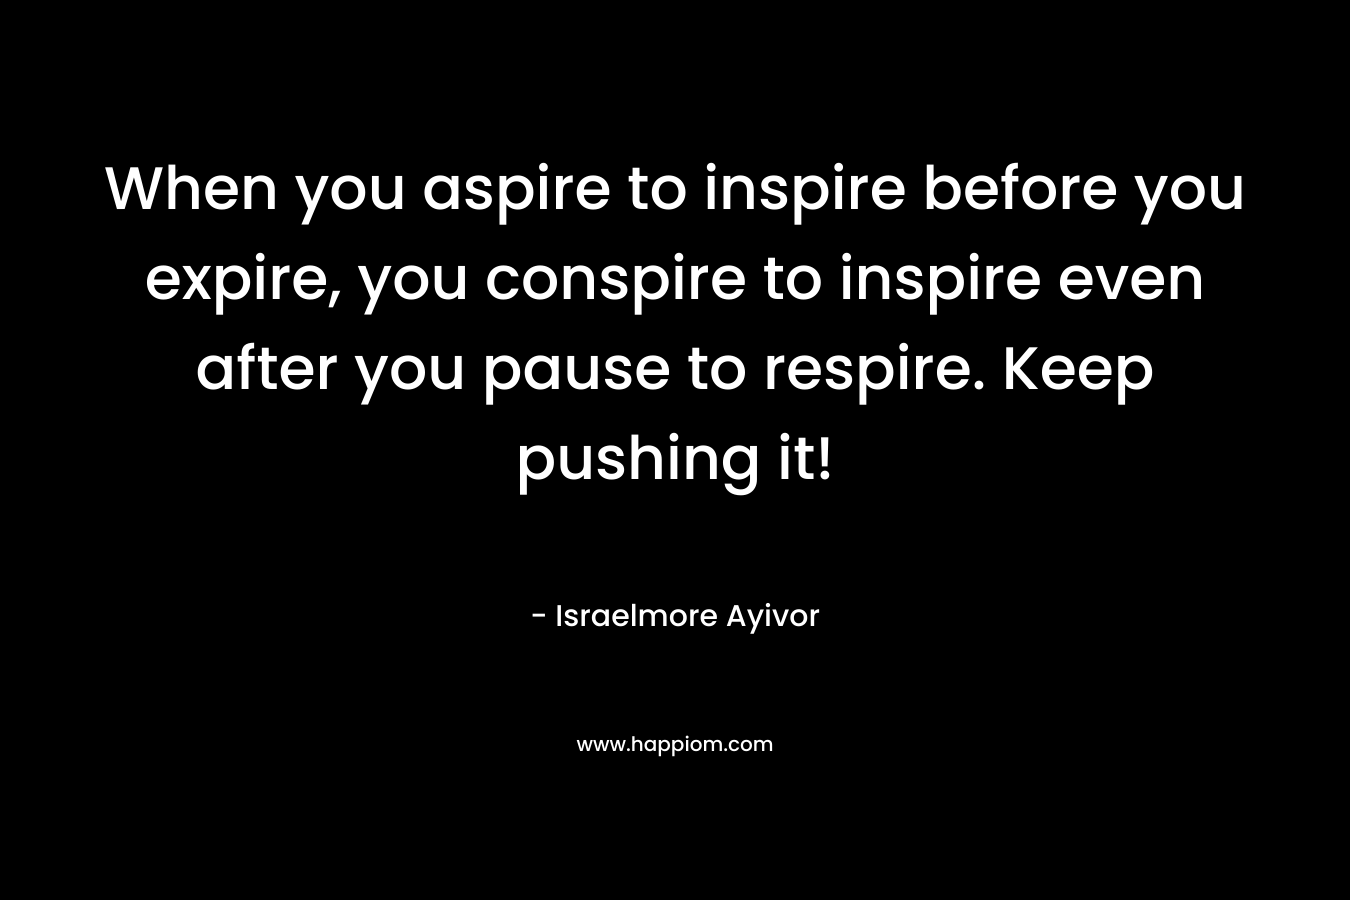 When you aspire to inspire before you expire, you conspire to inspire even after you pause to respire. Keep pushing it!